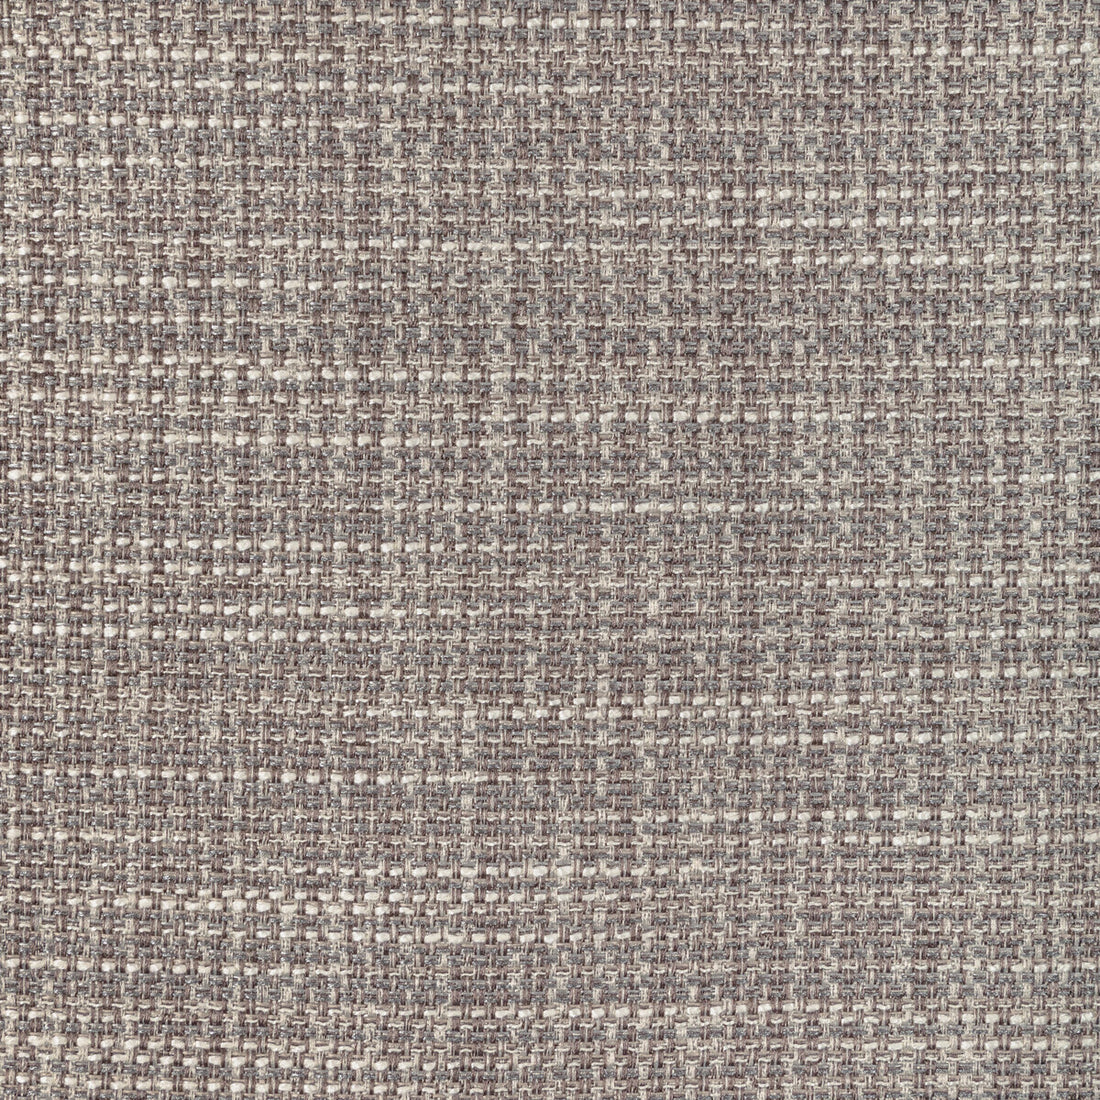 Luma Texture fabric in stone color - pattern 4947.2111.0 - by Kravet Contract in the Fr Window Luma Texture collection